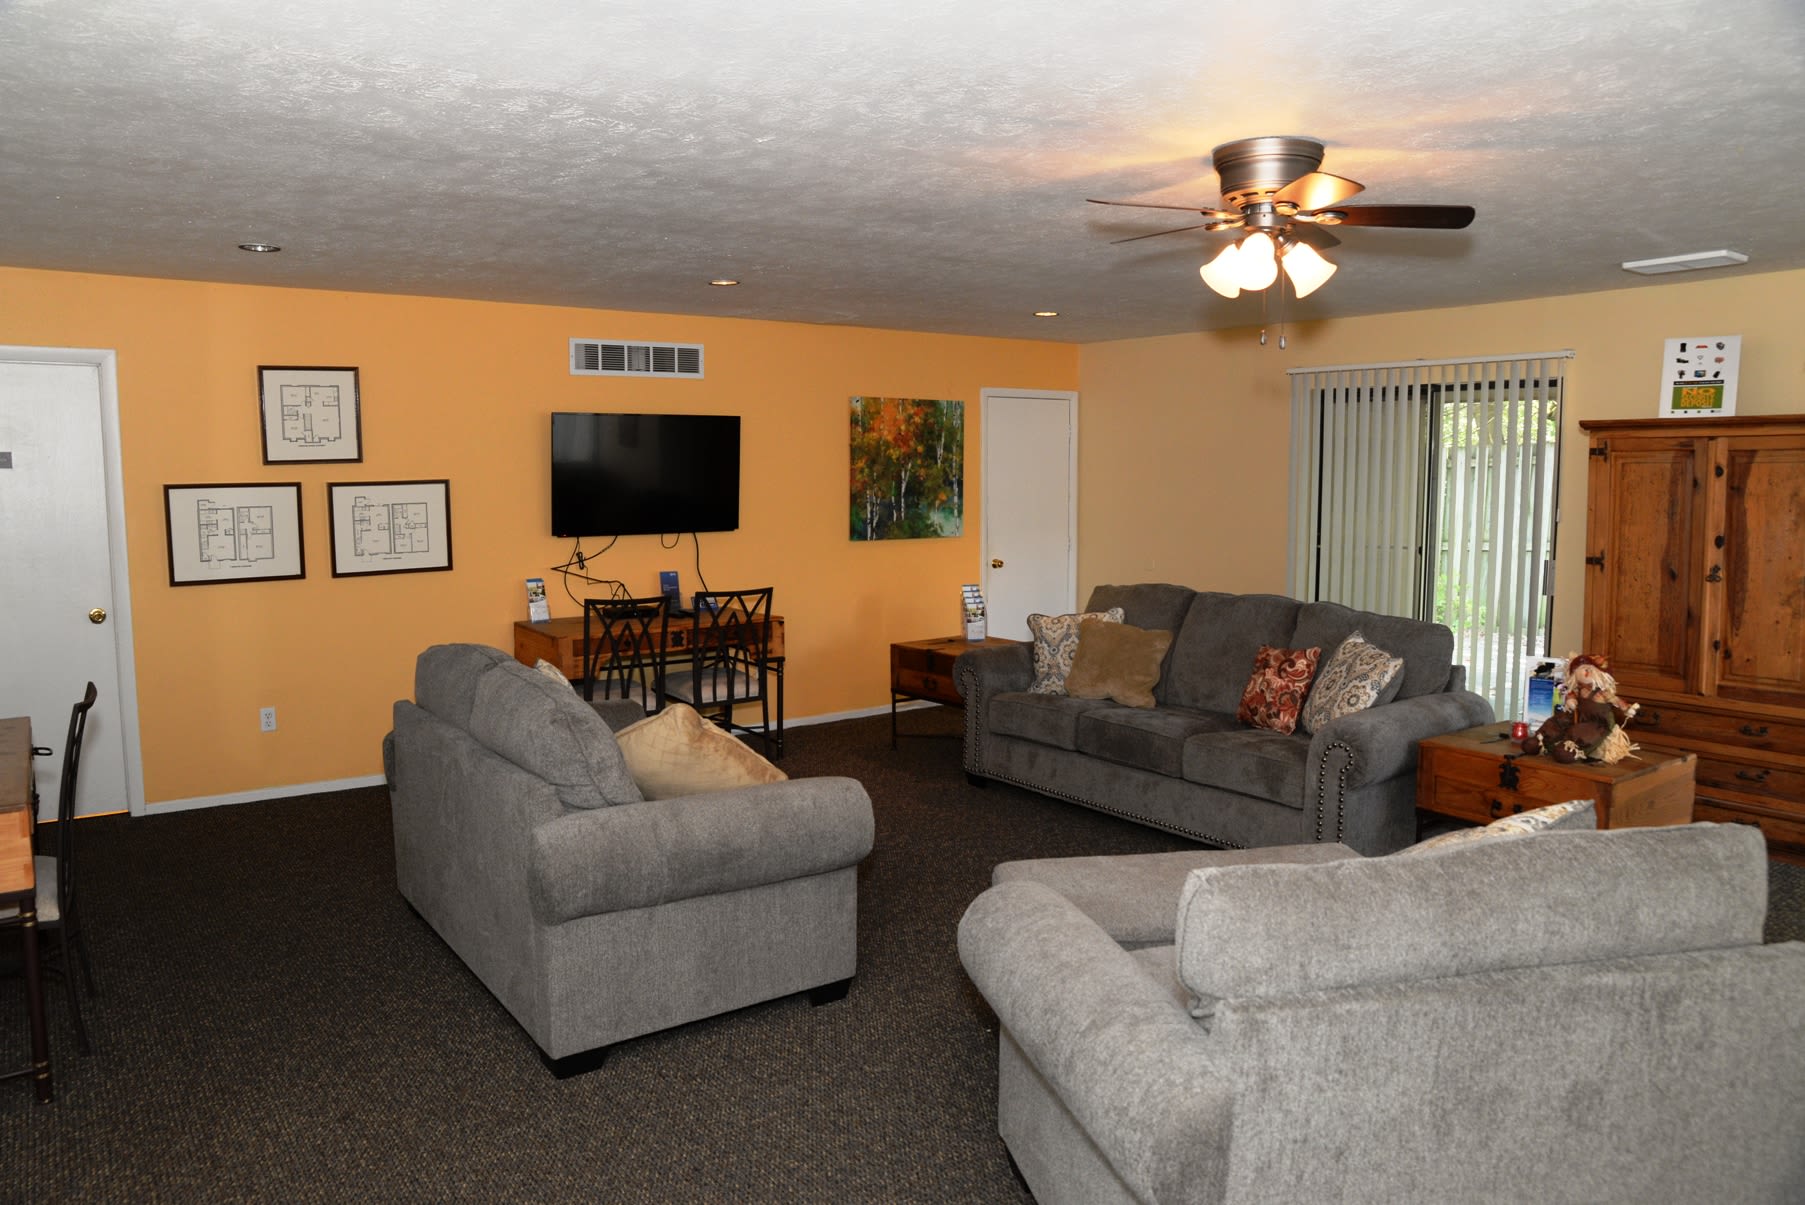 Community lounge area at North River Place in Chillicothe, Ohio